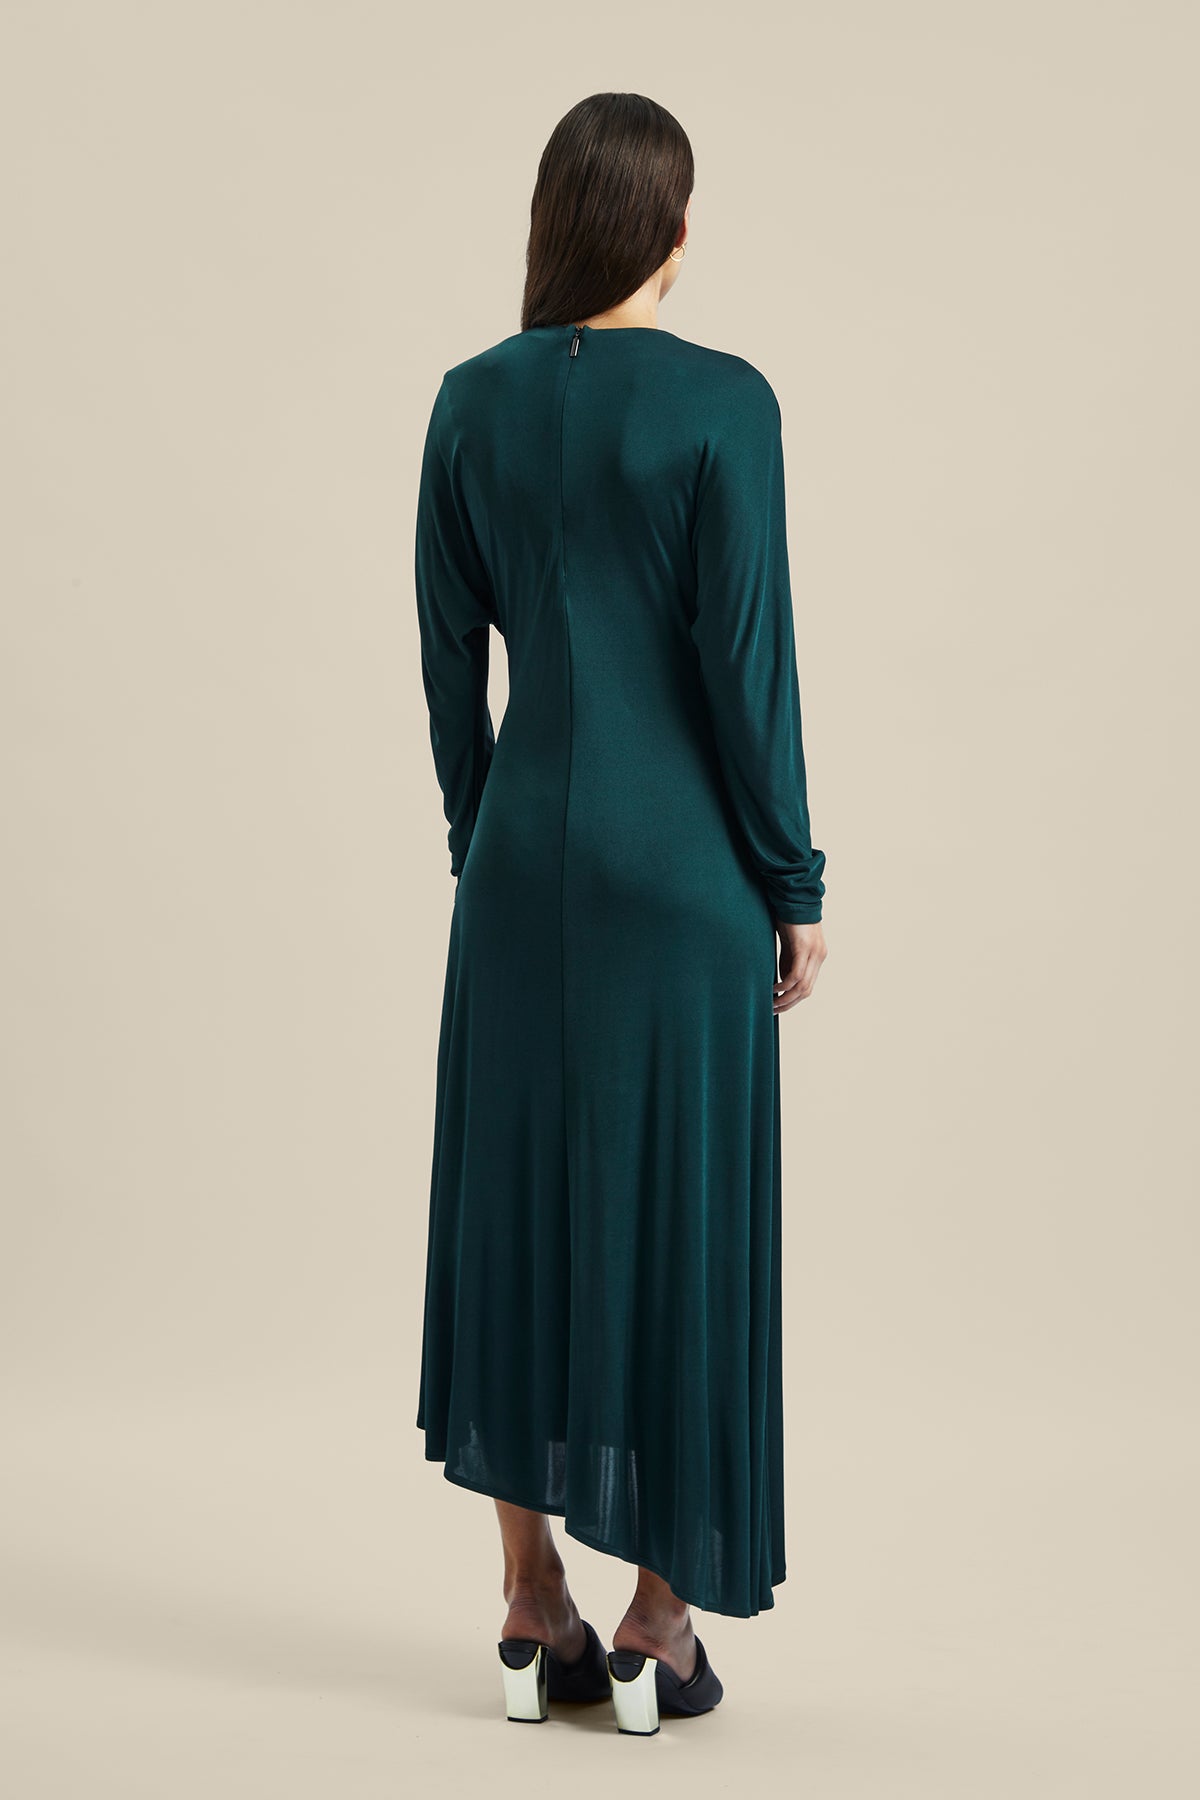 Back view of a Model wearing the forest green silk Coalesce Twist Front Dress from Australian women’s designer Ginger and Smart featuring bias cut, cut out derail above the collarbone and midi length.